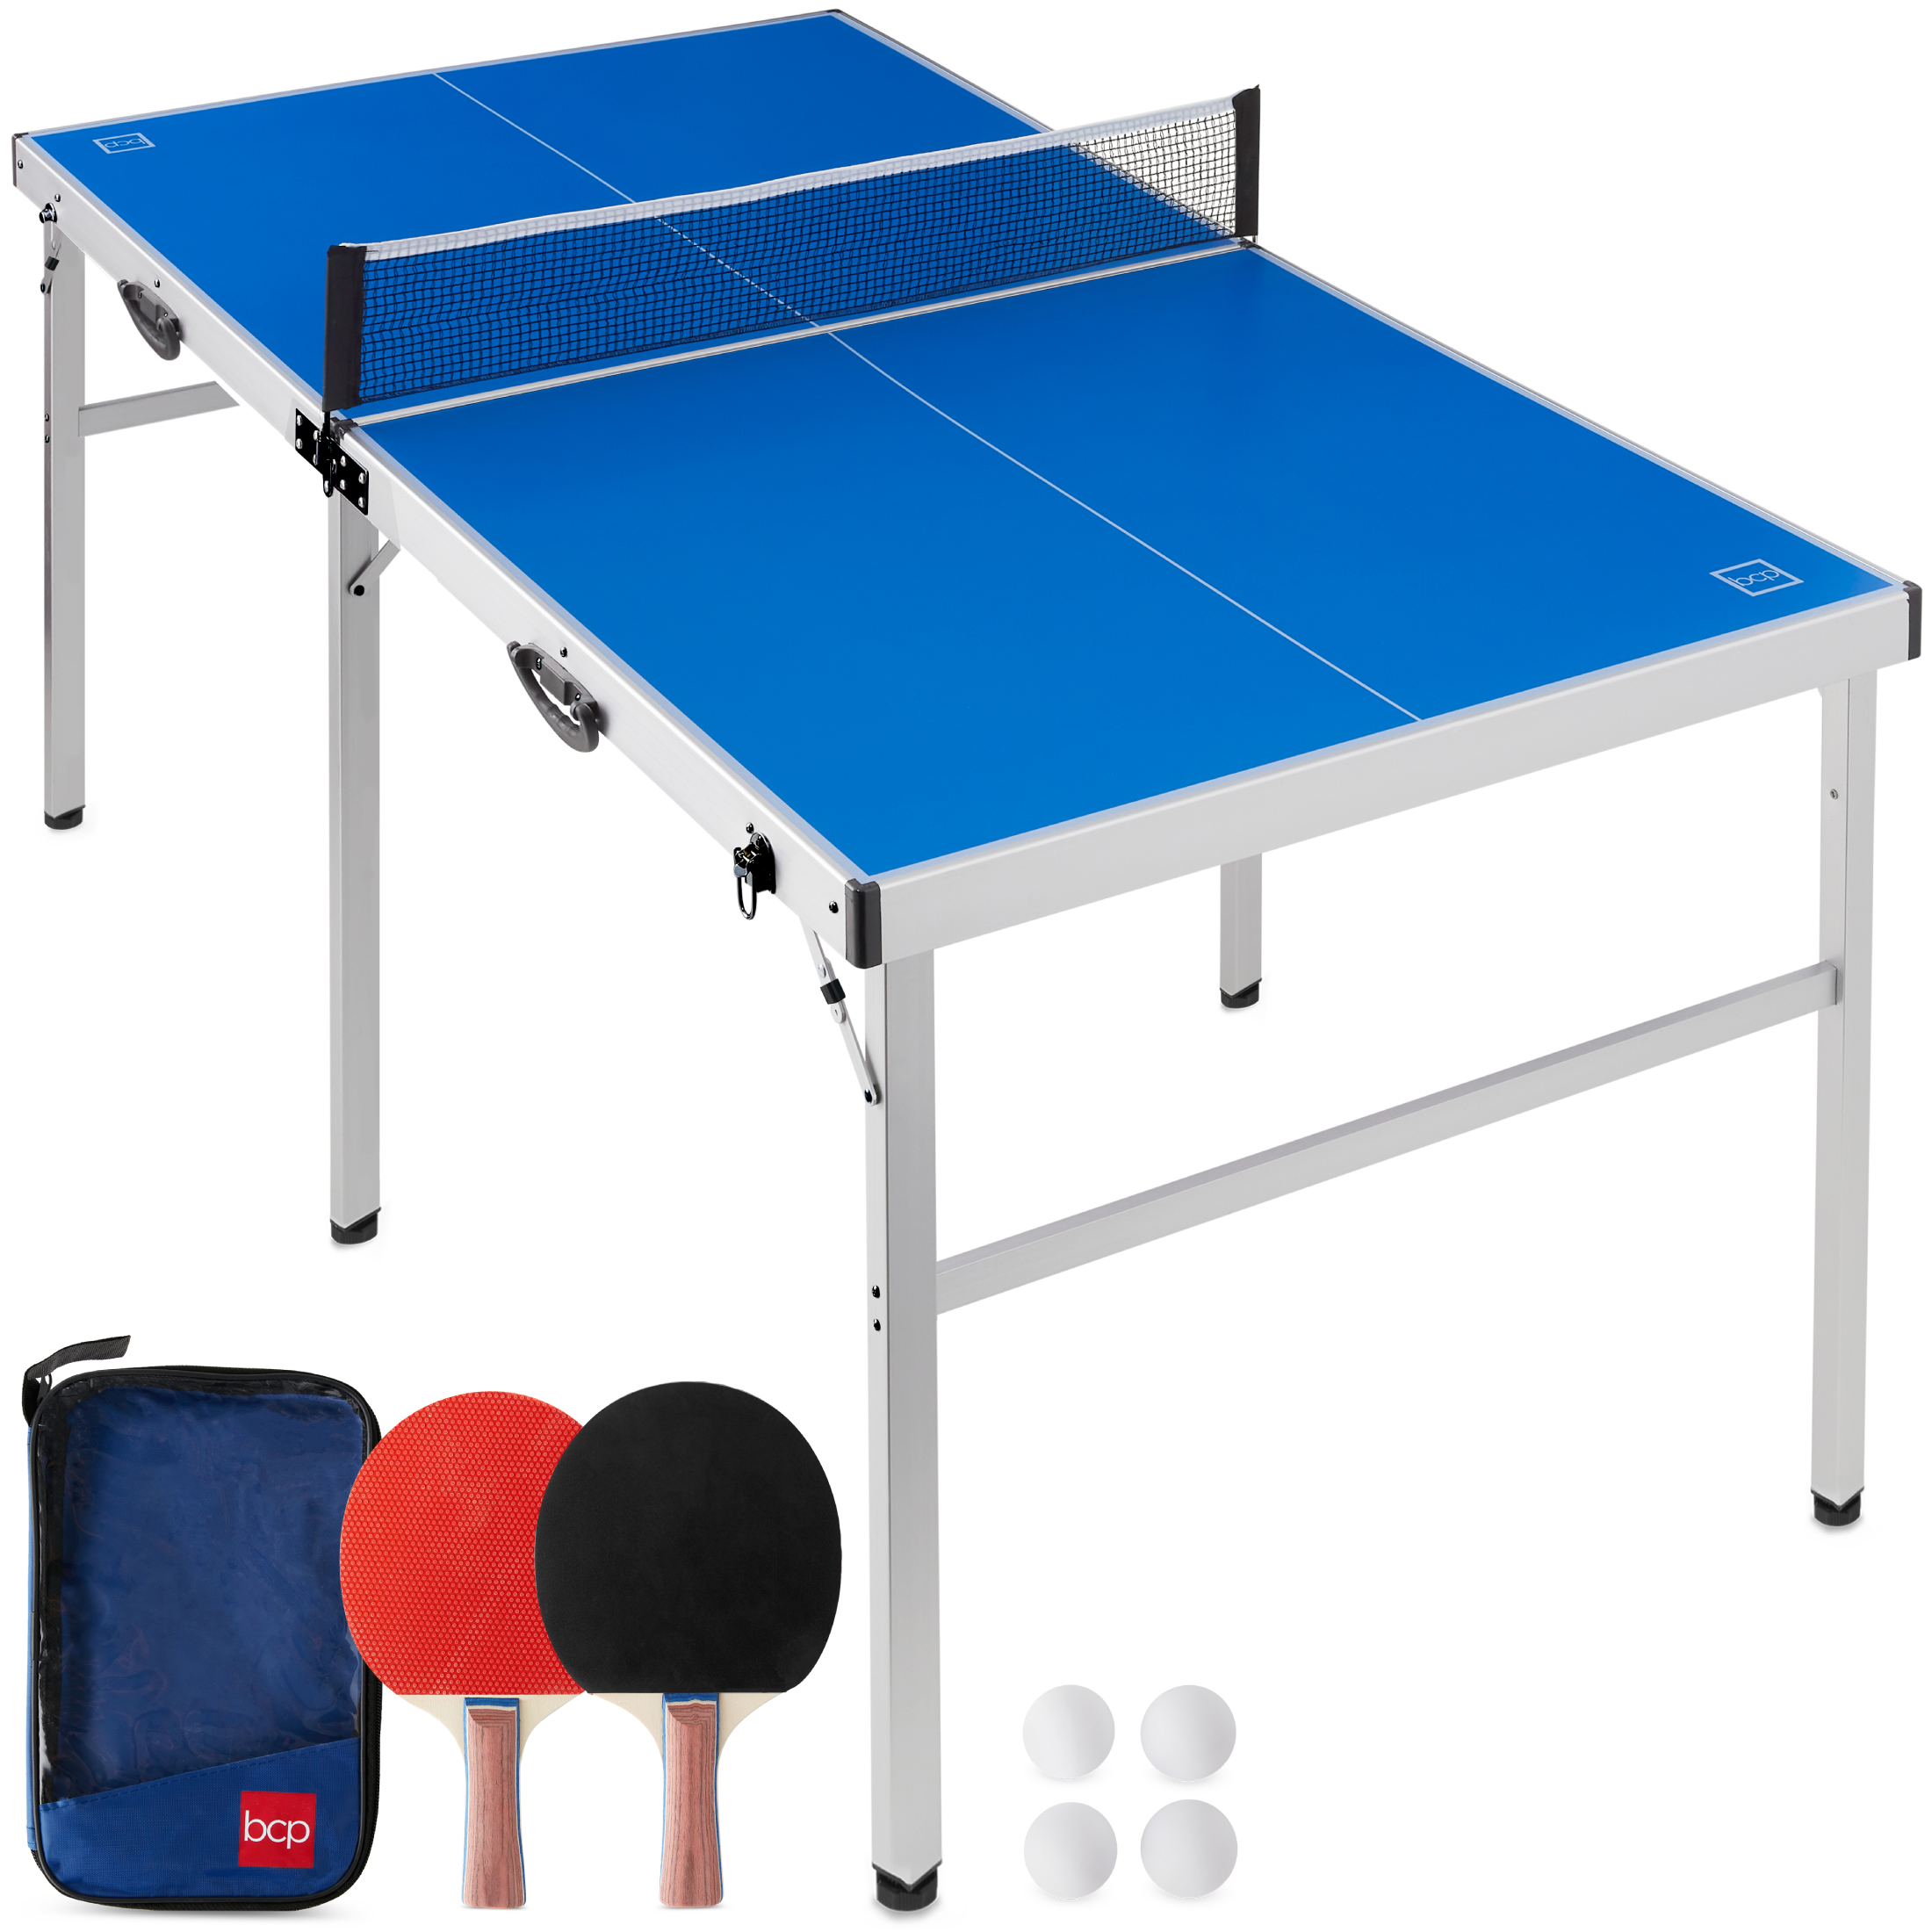 Best Choice Products 6x3ft Portable Ping Pong Table Game Set, Folding Indoor Outdoor Table Tennis w/ 2 Paddles, Balls - image 1 of 7